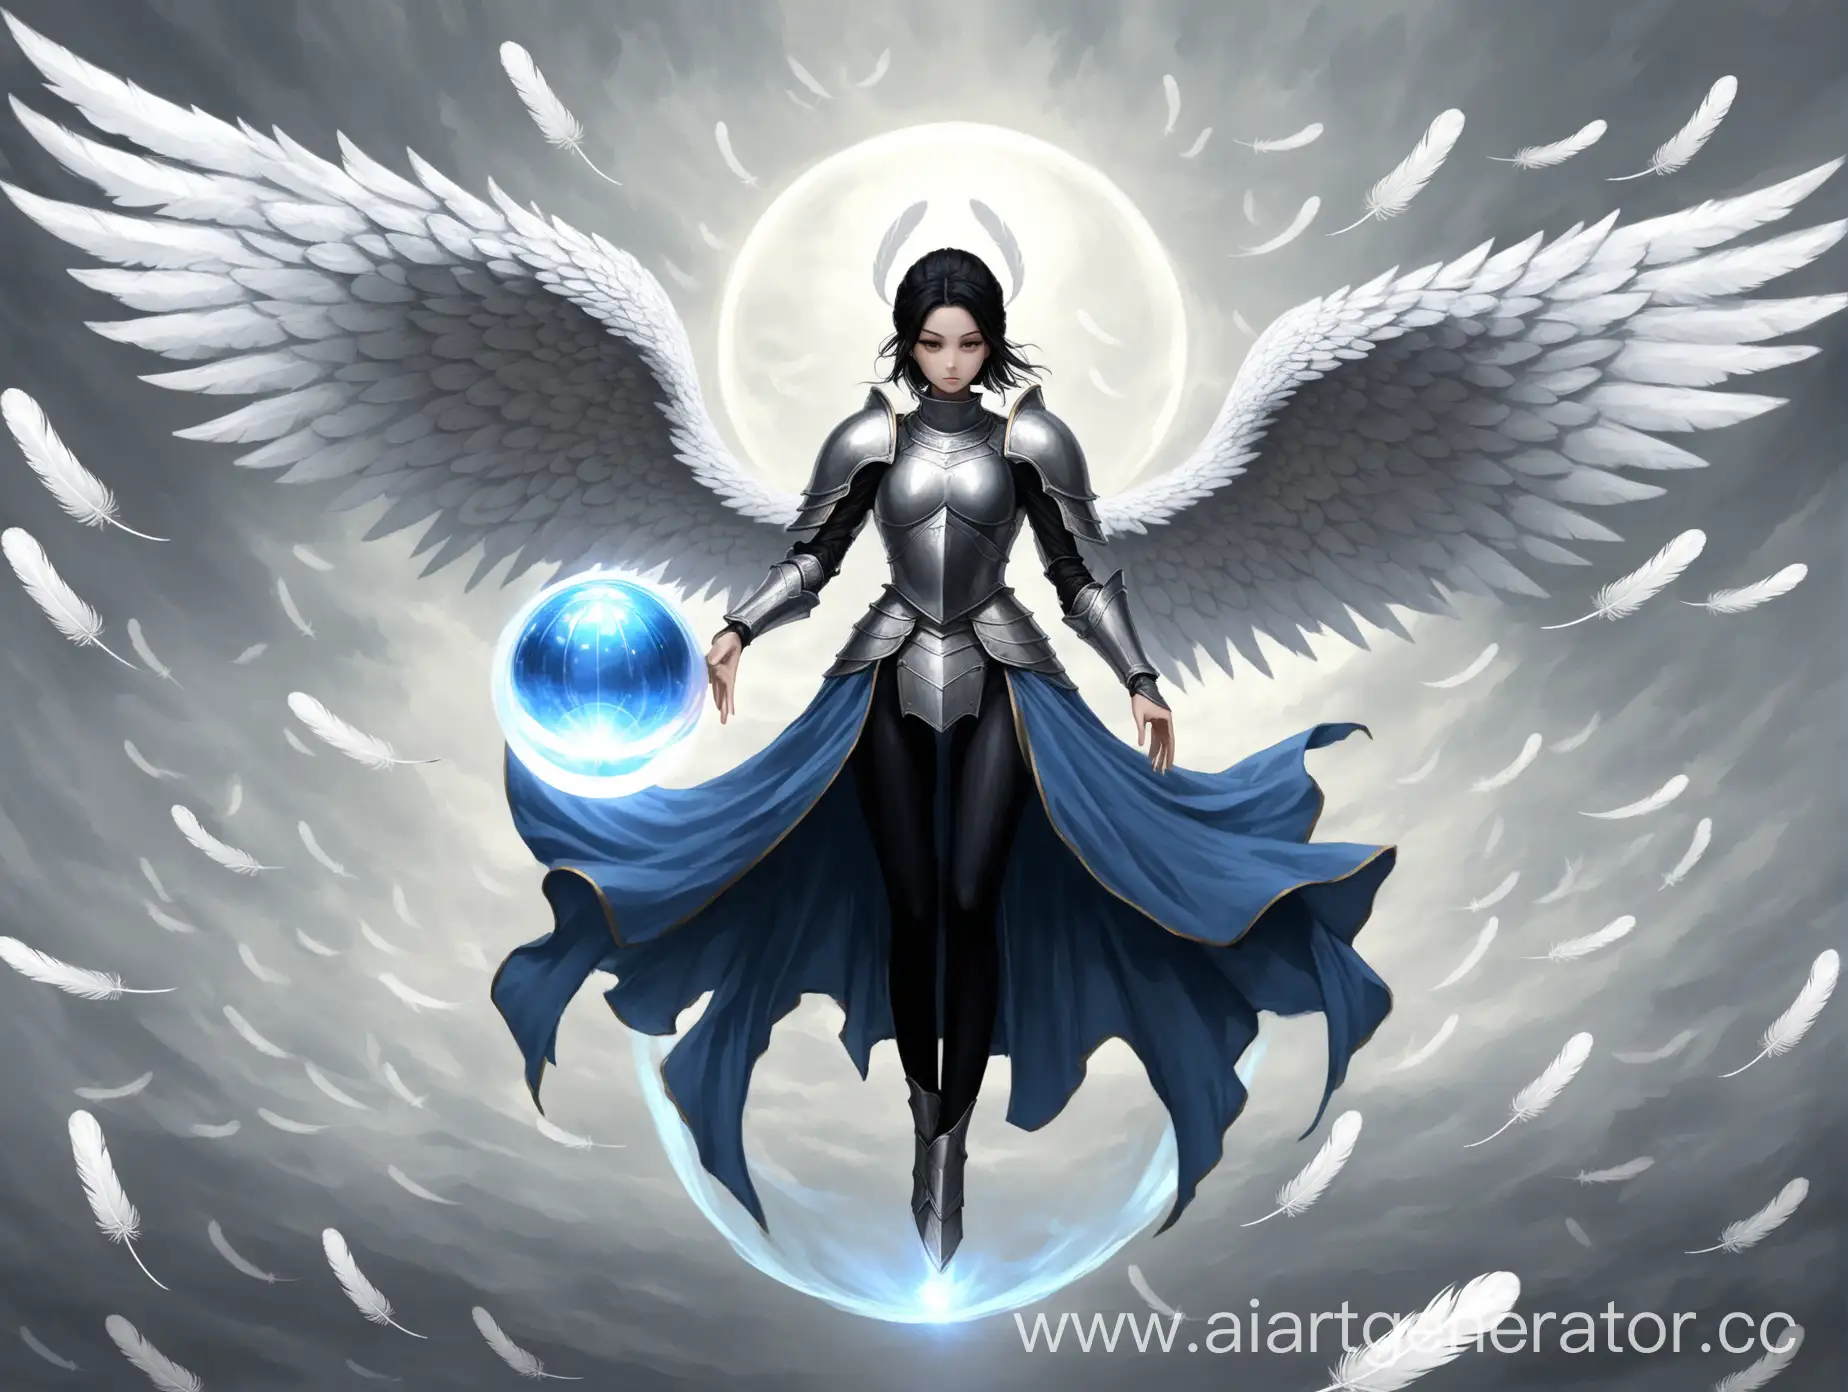 Warrior-Woman-in-Grey-Armor-with-Giant-Wings-and-Magic-Ball